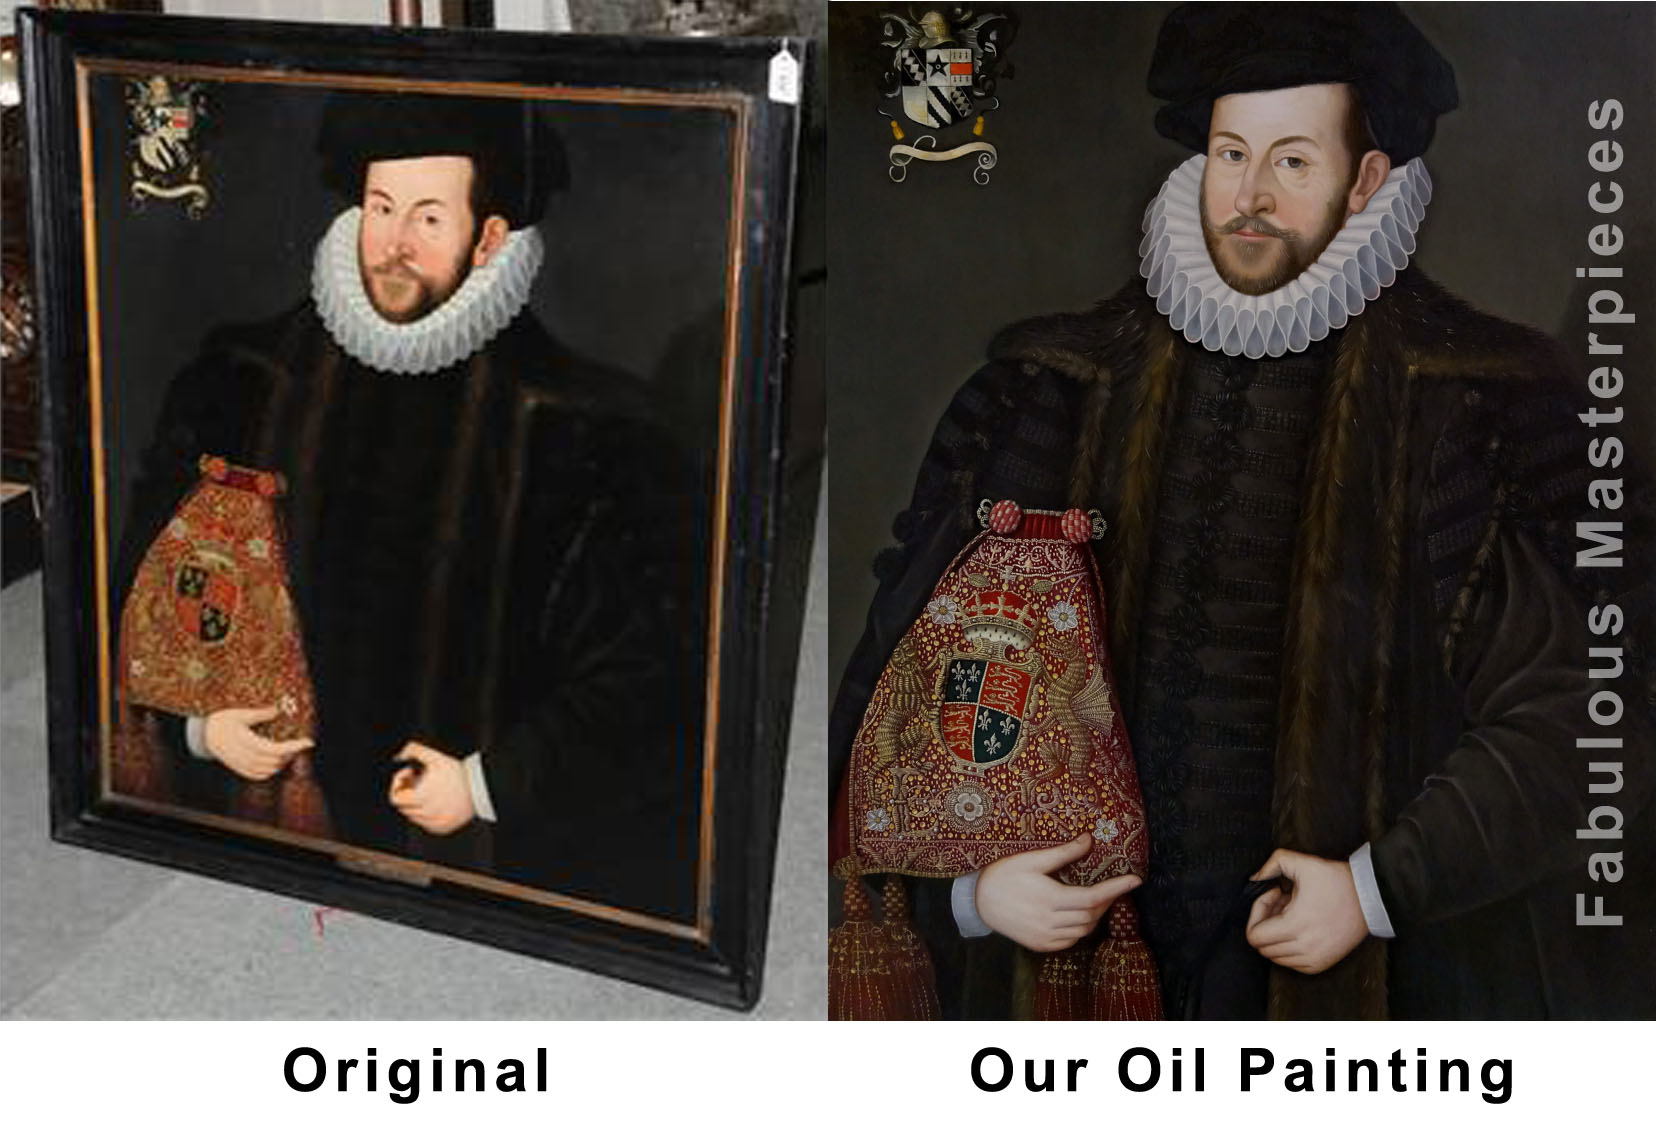 Old masters